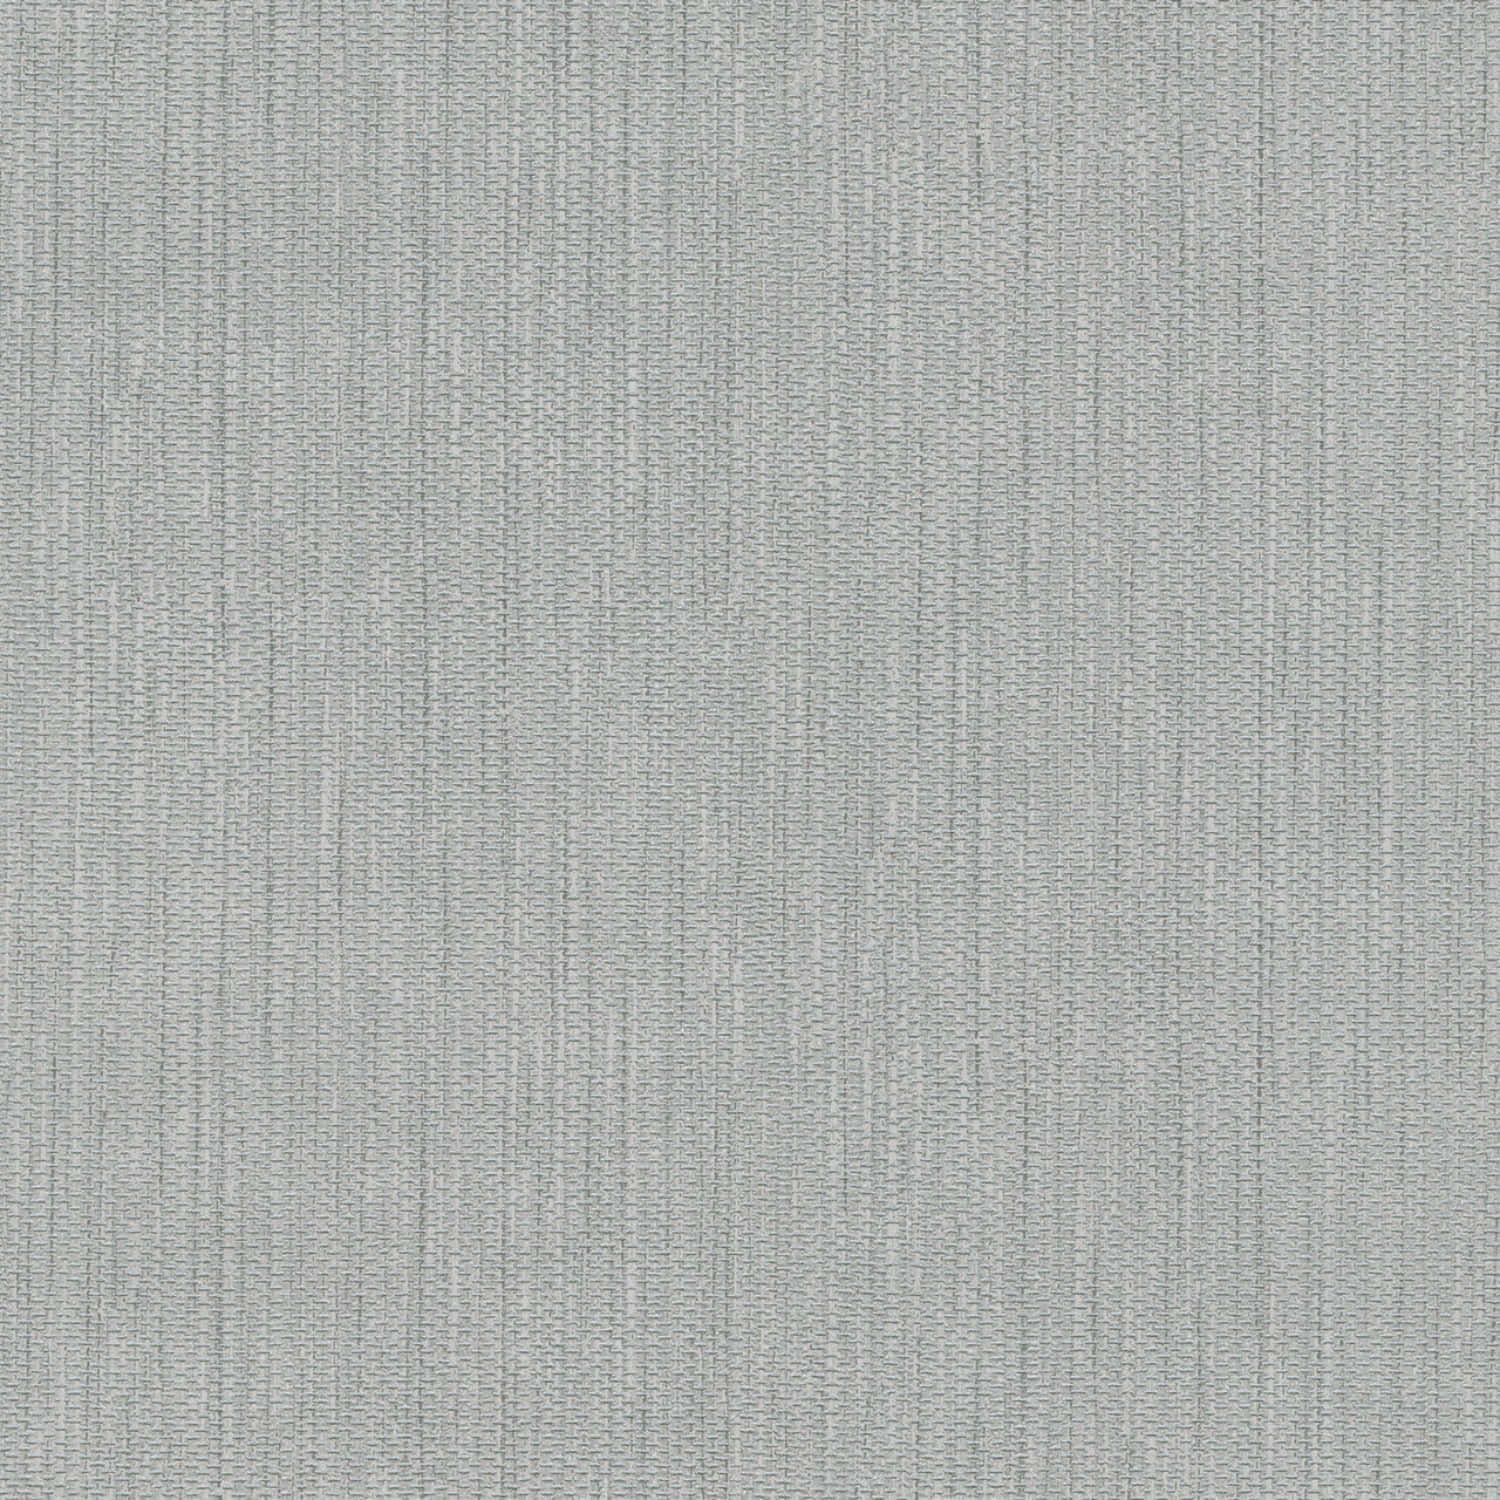 A Grey Fabric With A Light Grey Background